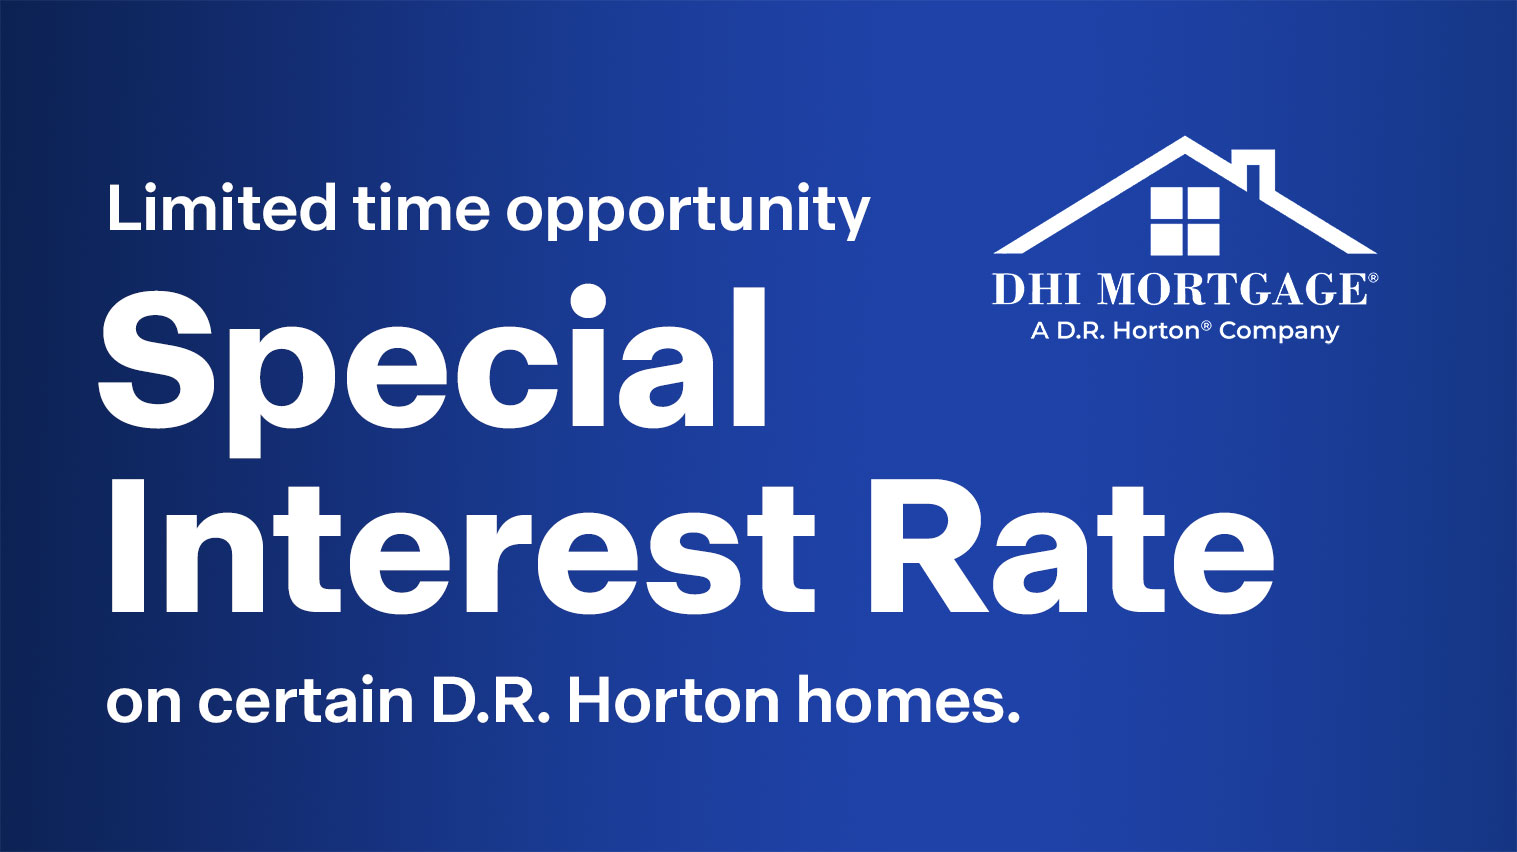 Limited time opportunity Special interest rate on certain D.R. Horton homes